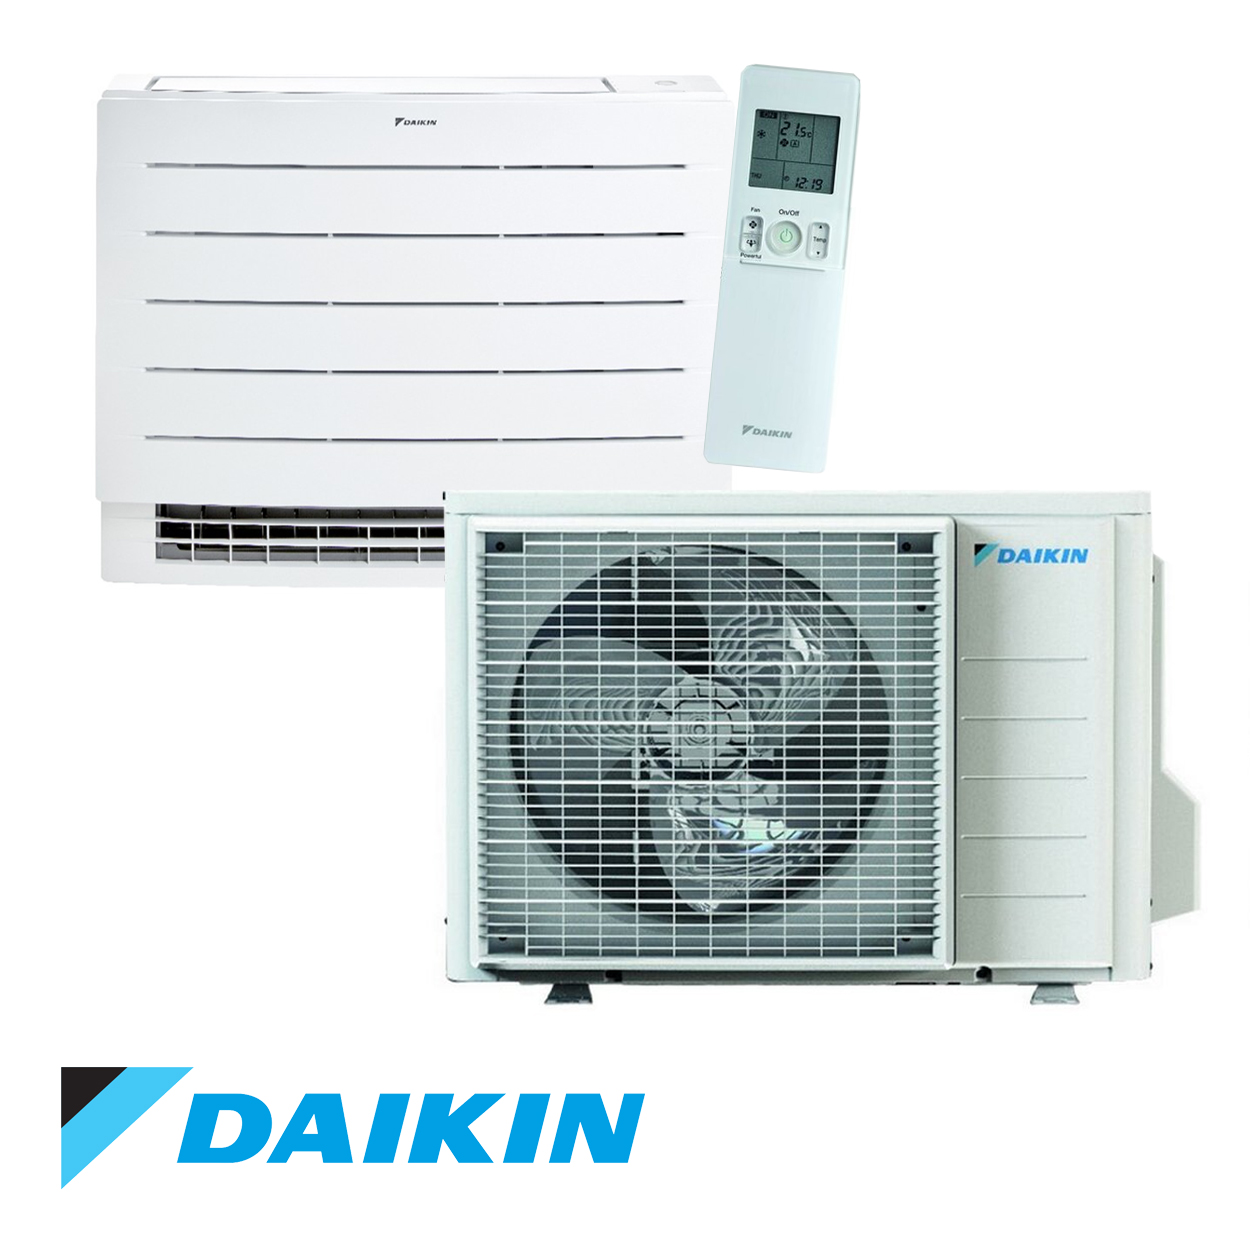 FVXM25A Airconditioning